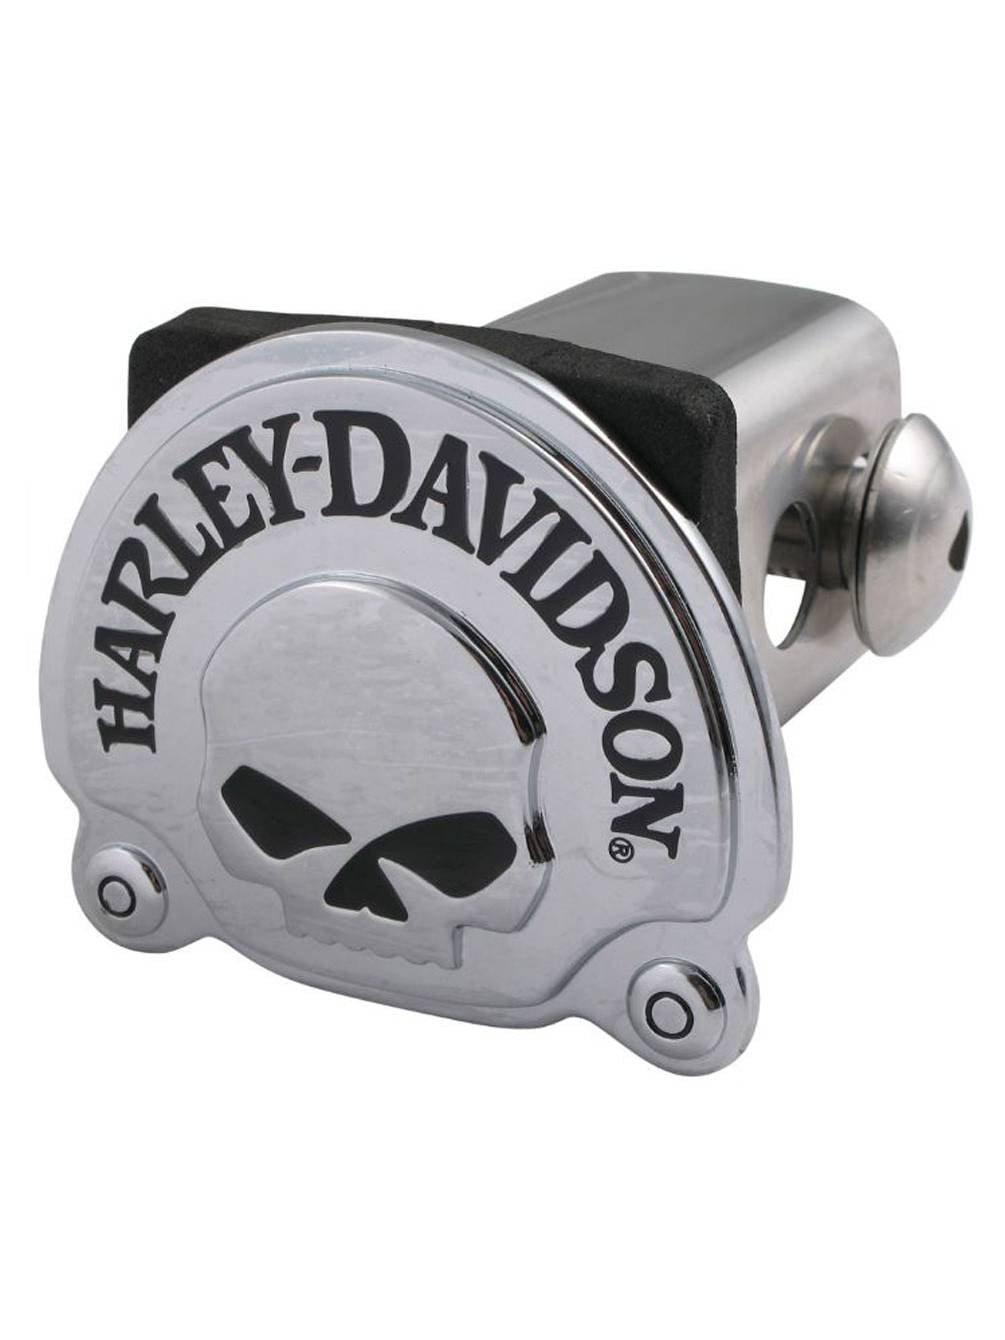 Harley-Davidson Trailer Tow Hitch Cover Plug Featuring The Willie G Skull 